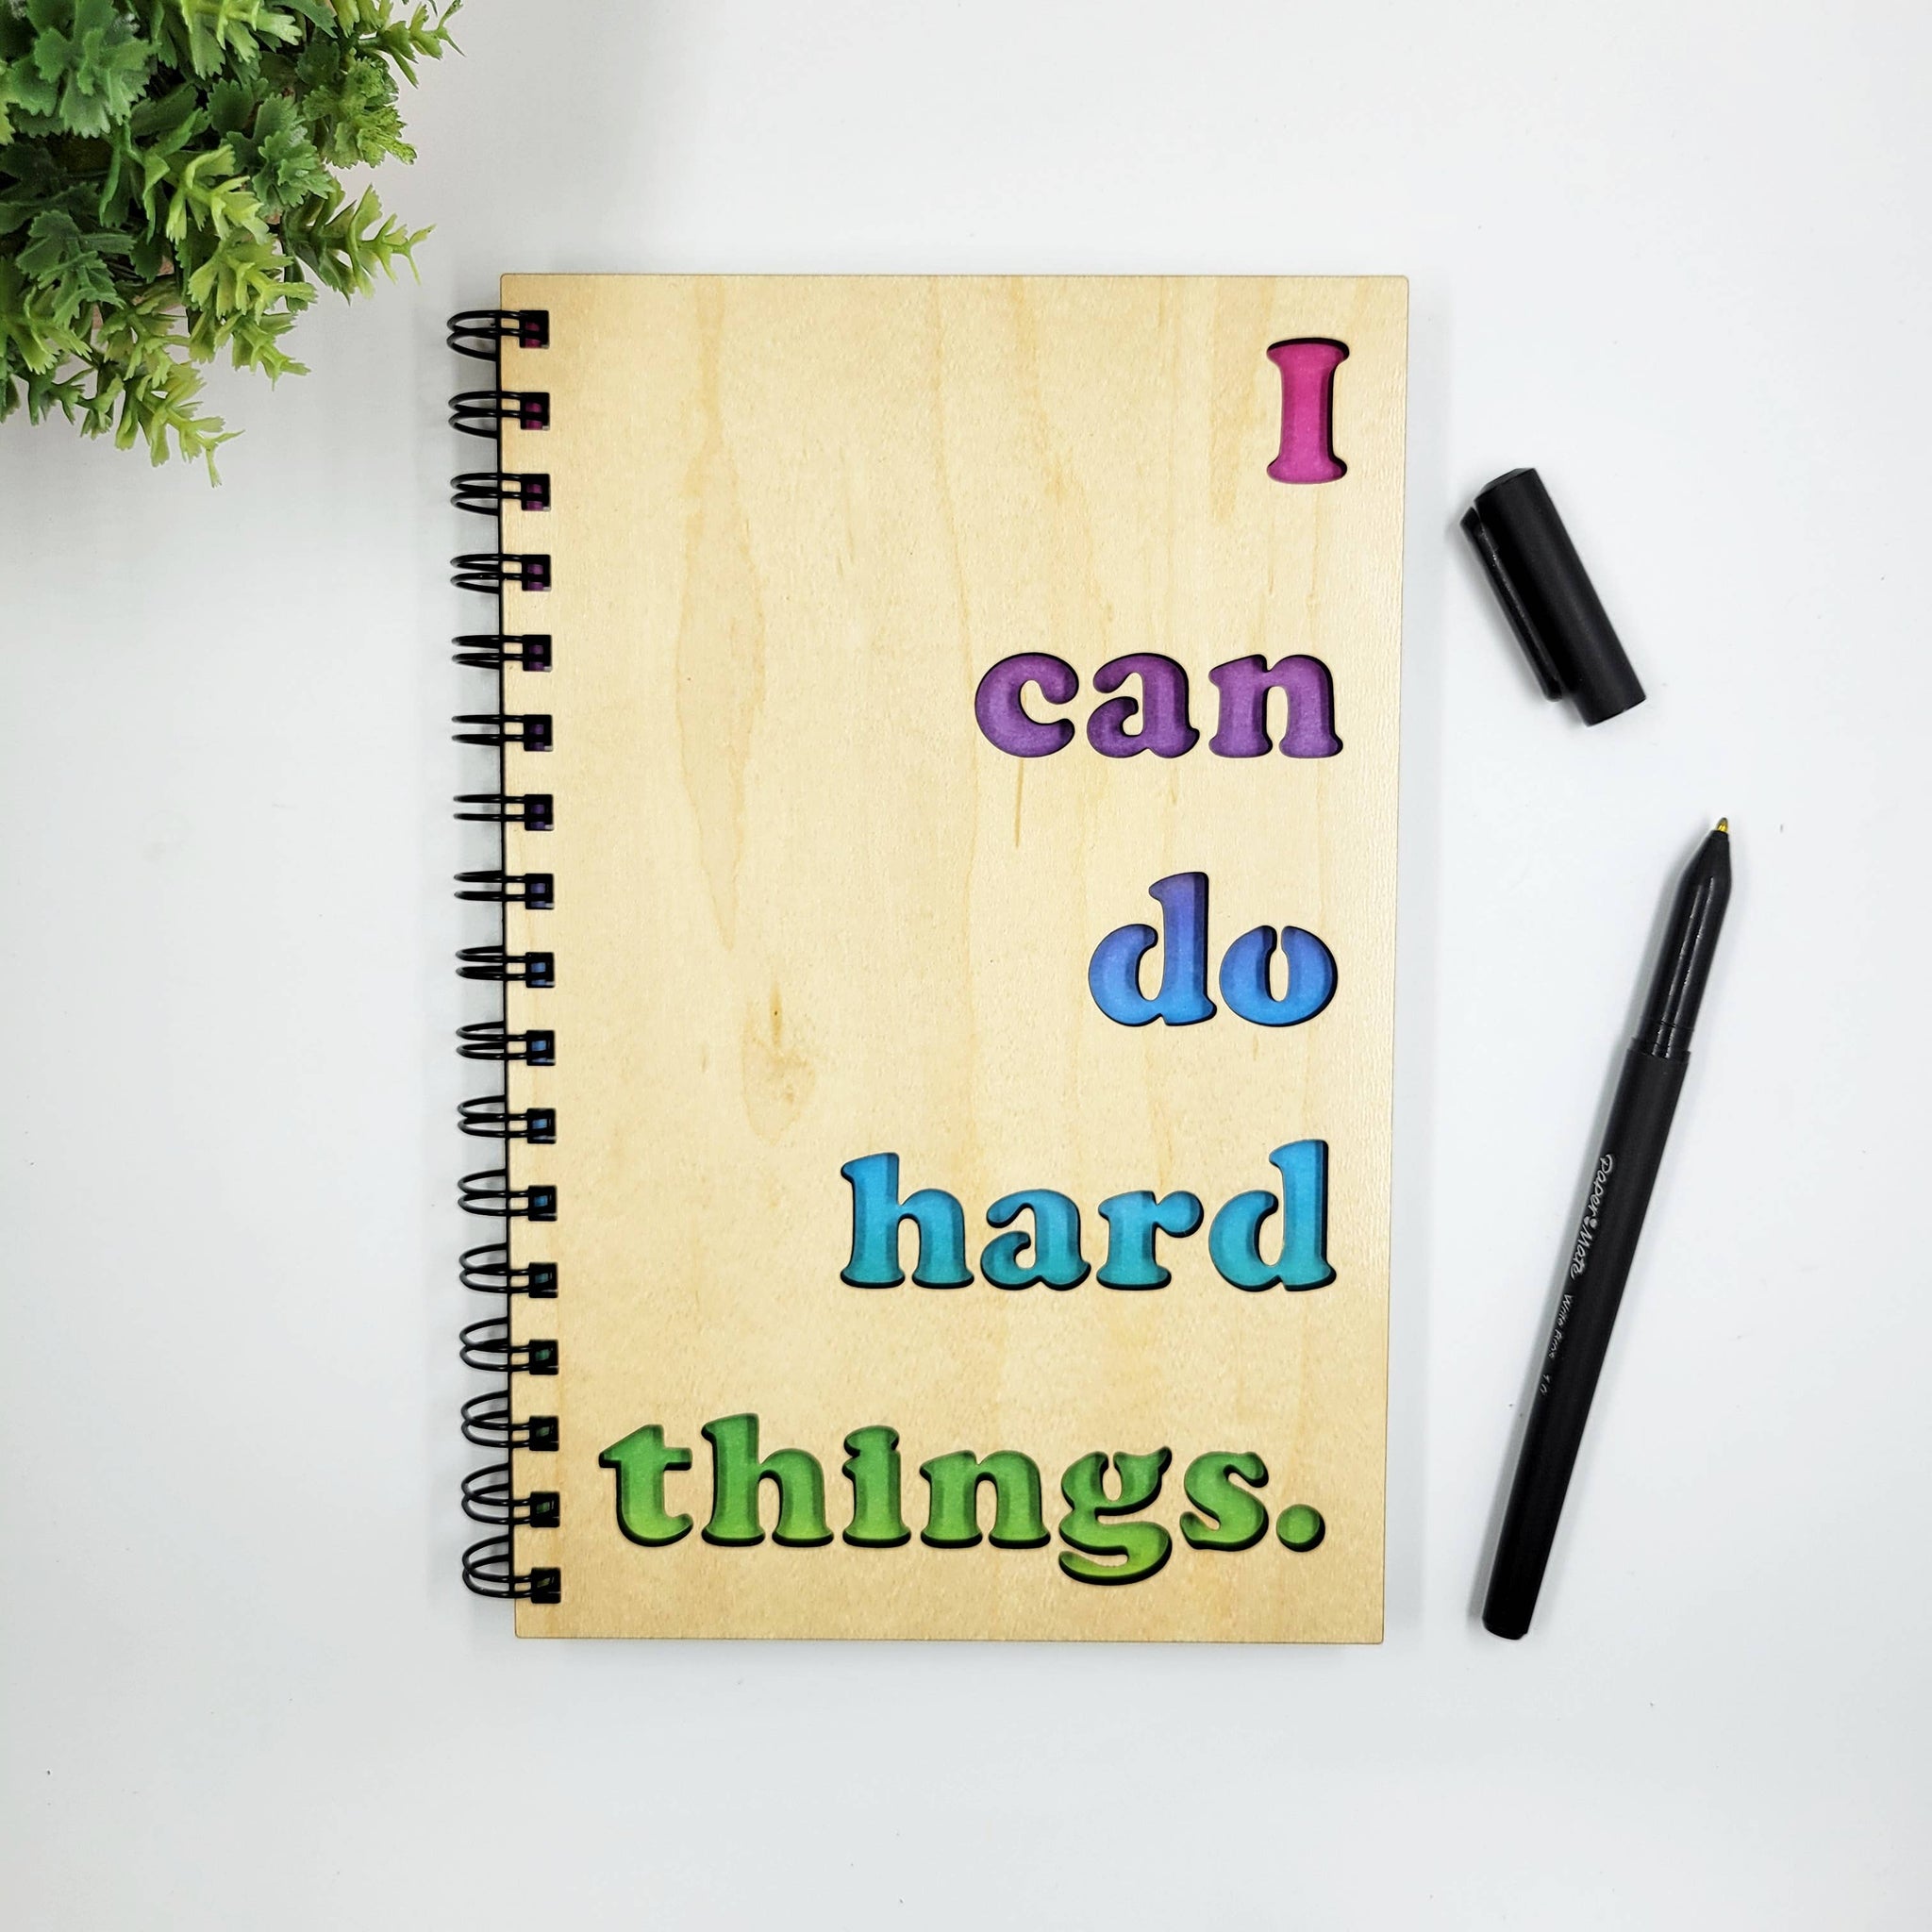 I can do hard things motivation wood journal - blank / lined